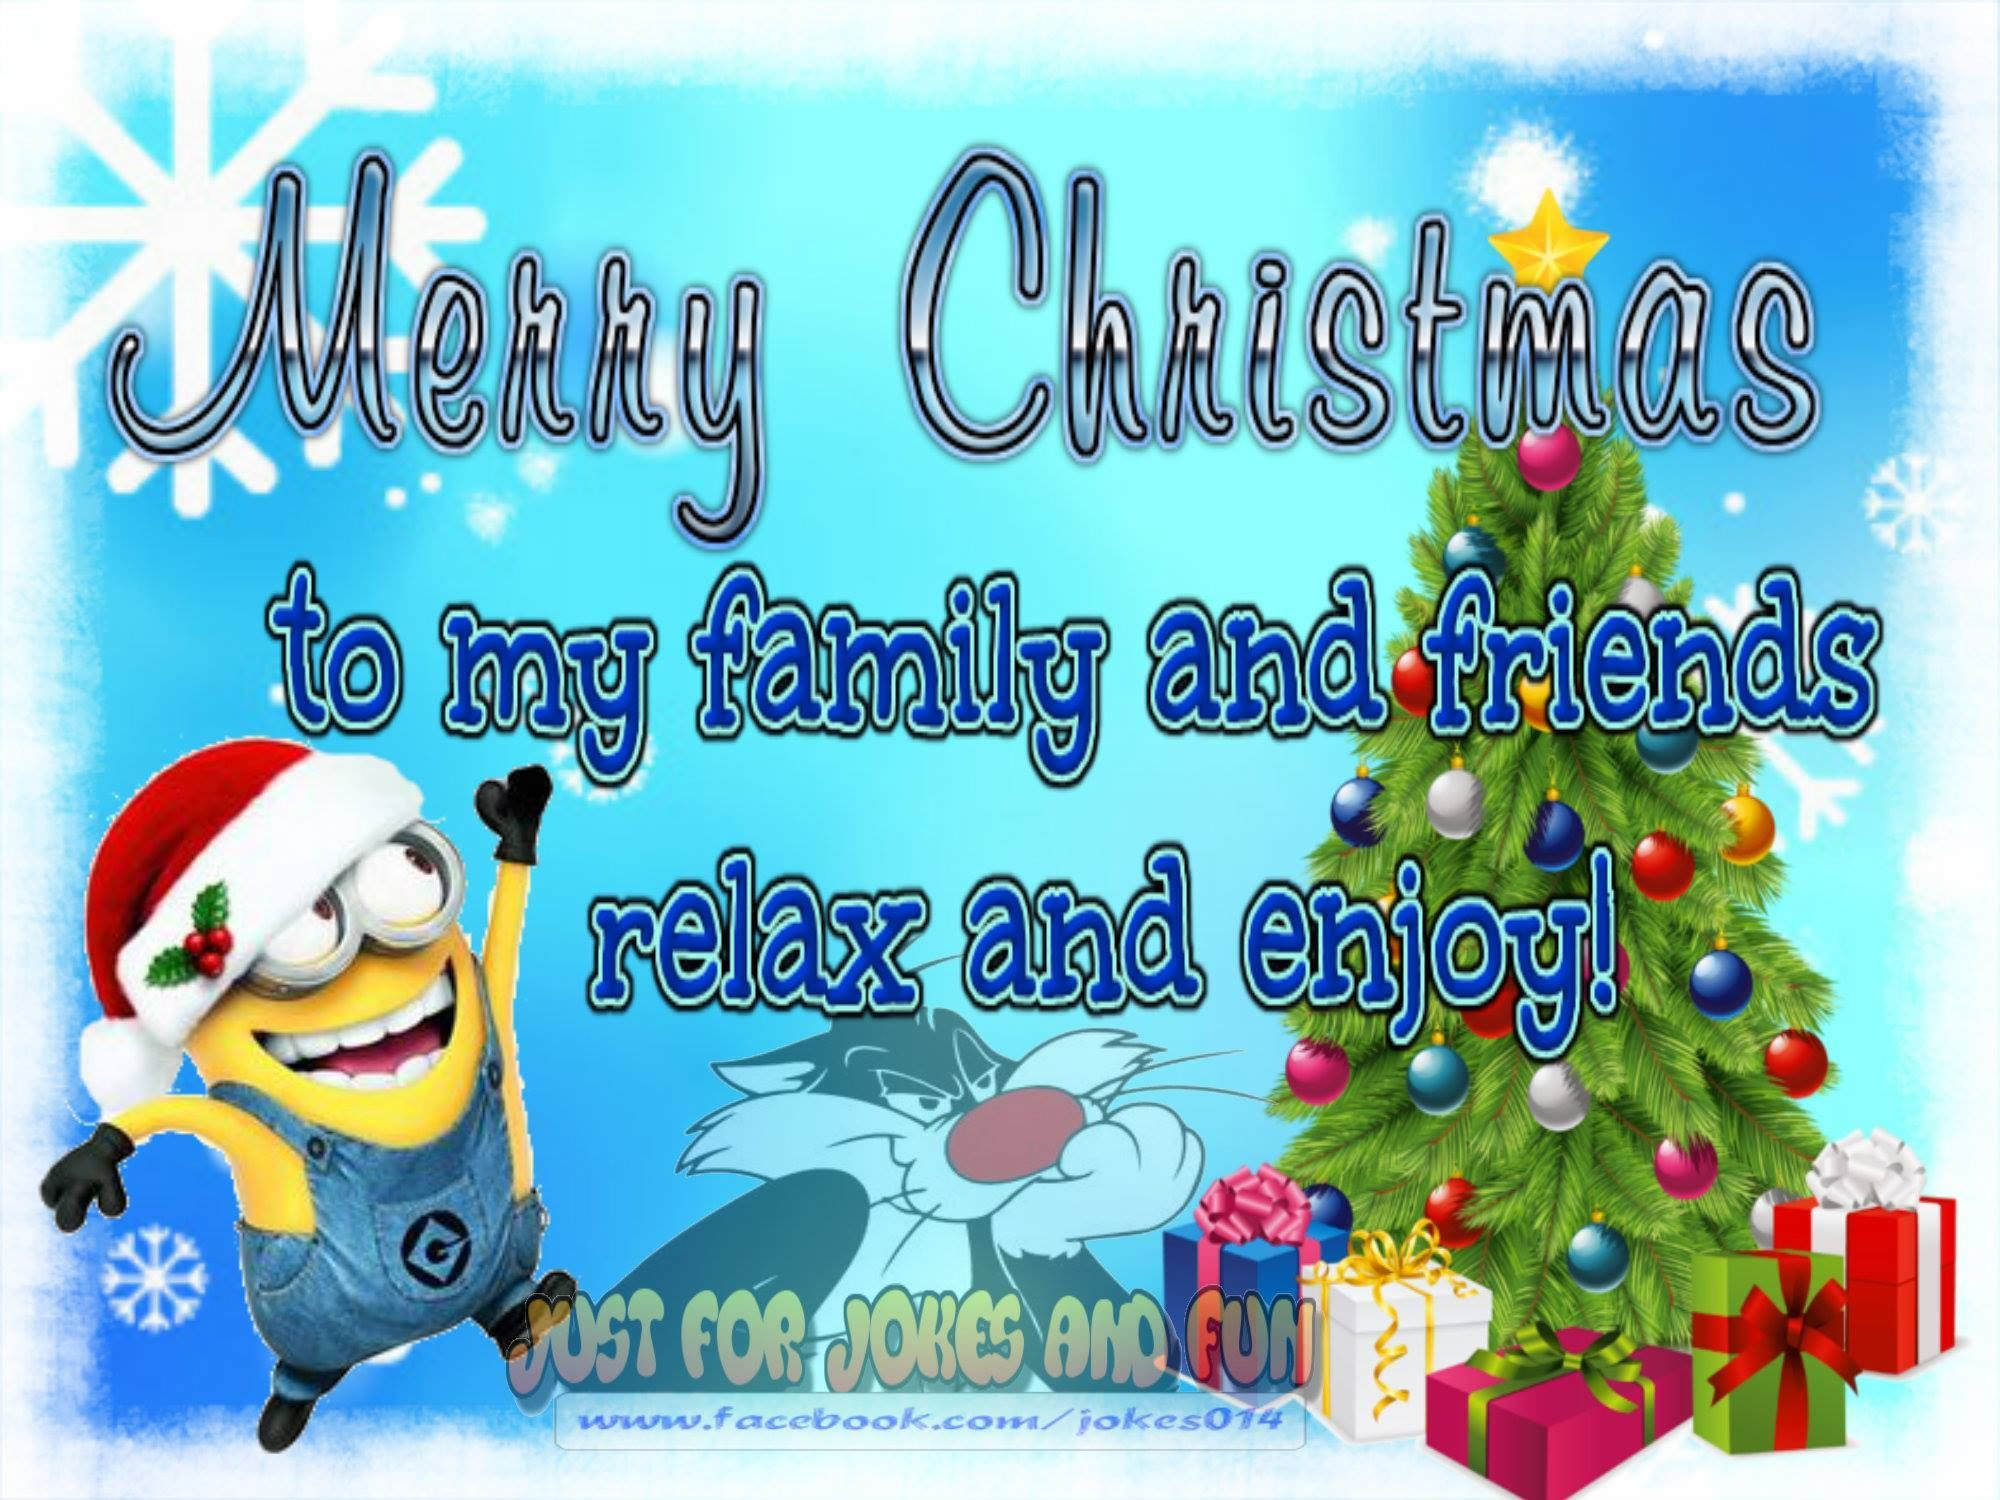 Merry Christmas To Family And Friends Quotes
 Merry Christmas To My Family And Friends Minion Quote